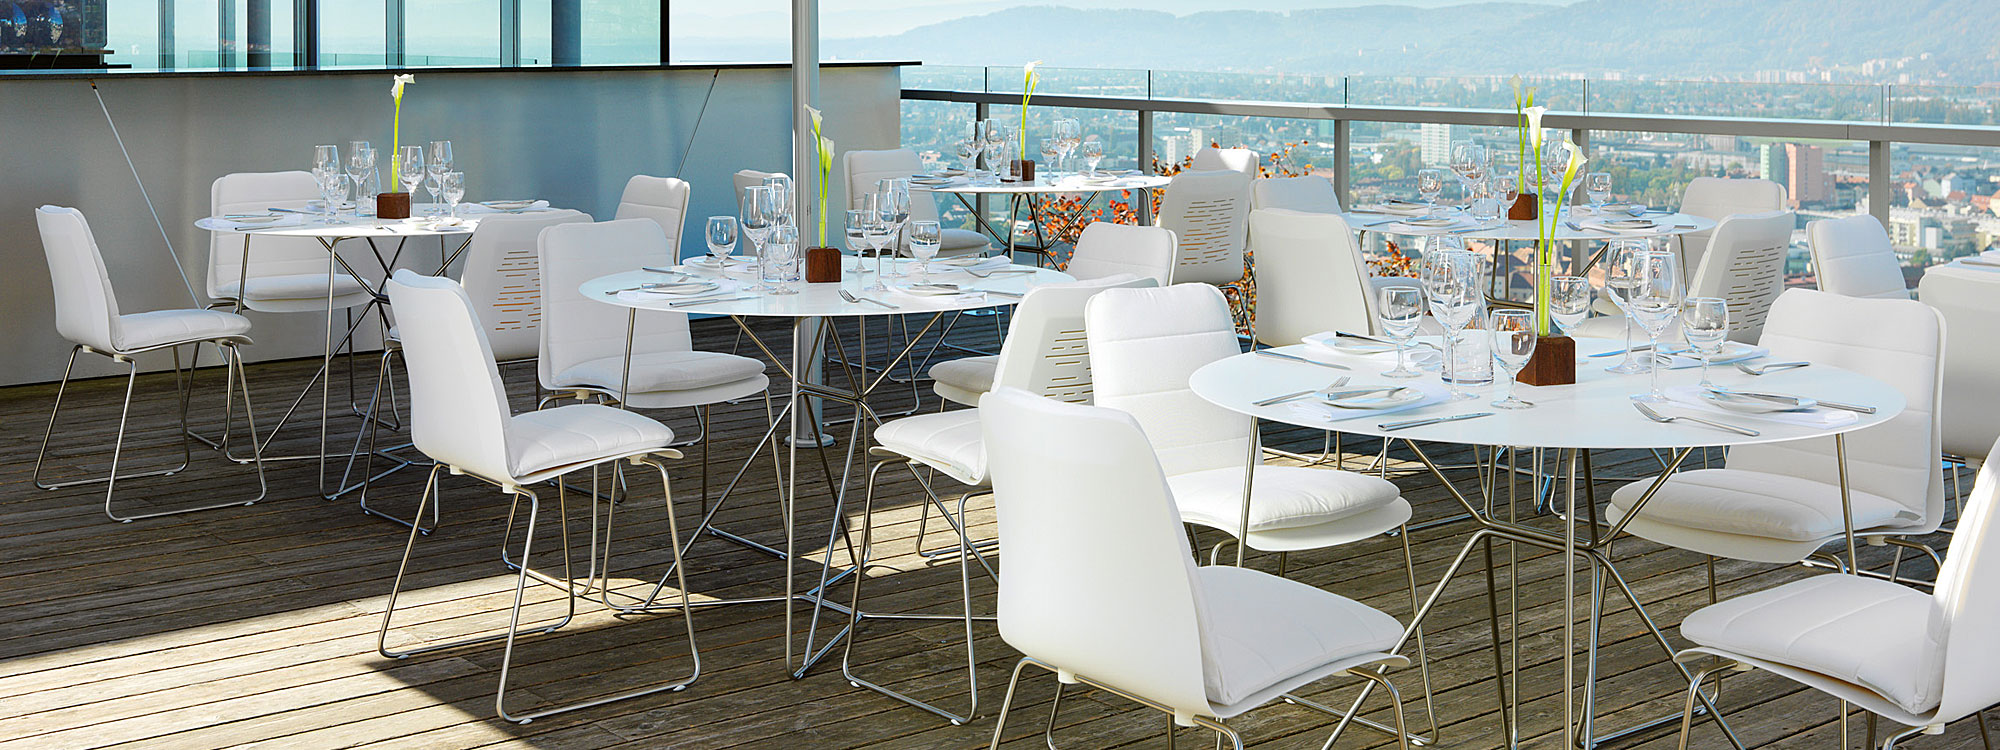 white-Corian-contract-stacking-chairs-and-tables-contemporary-design.jpg